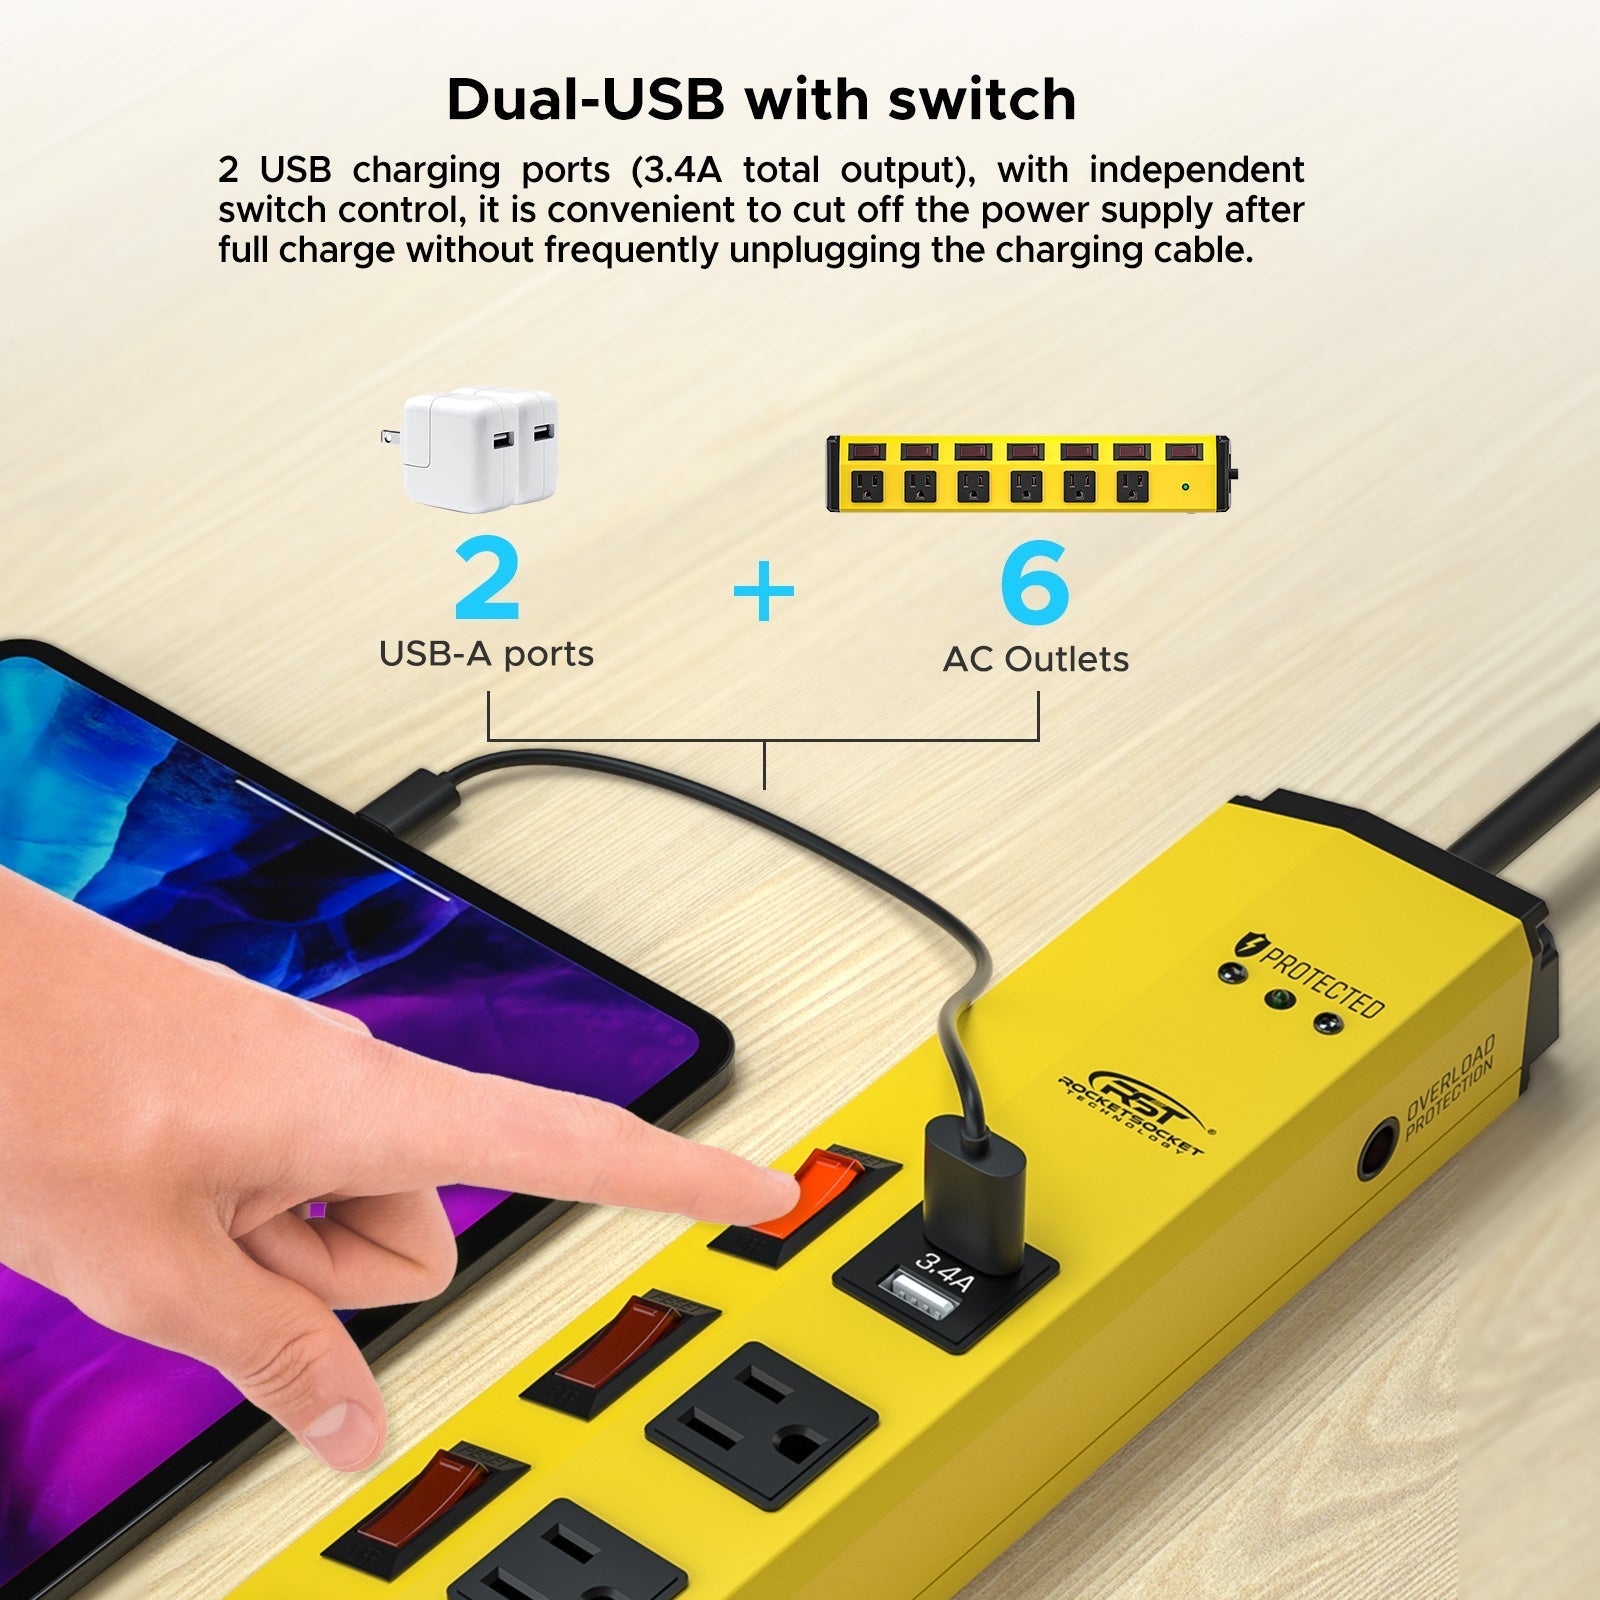 Surge Protector Power Strips w/ USB Port, Metal Case, 6' Cable – Strong  Hand Tools